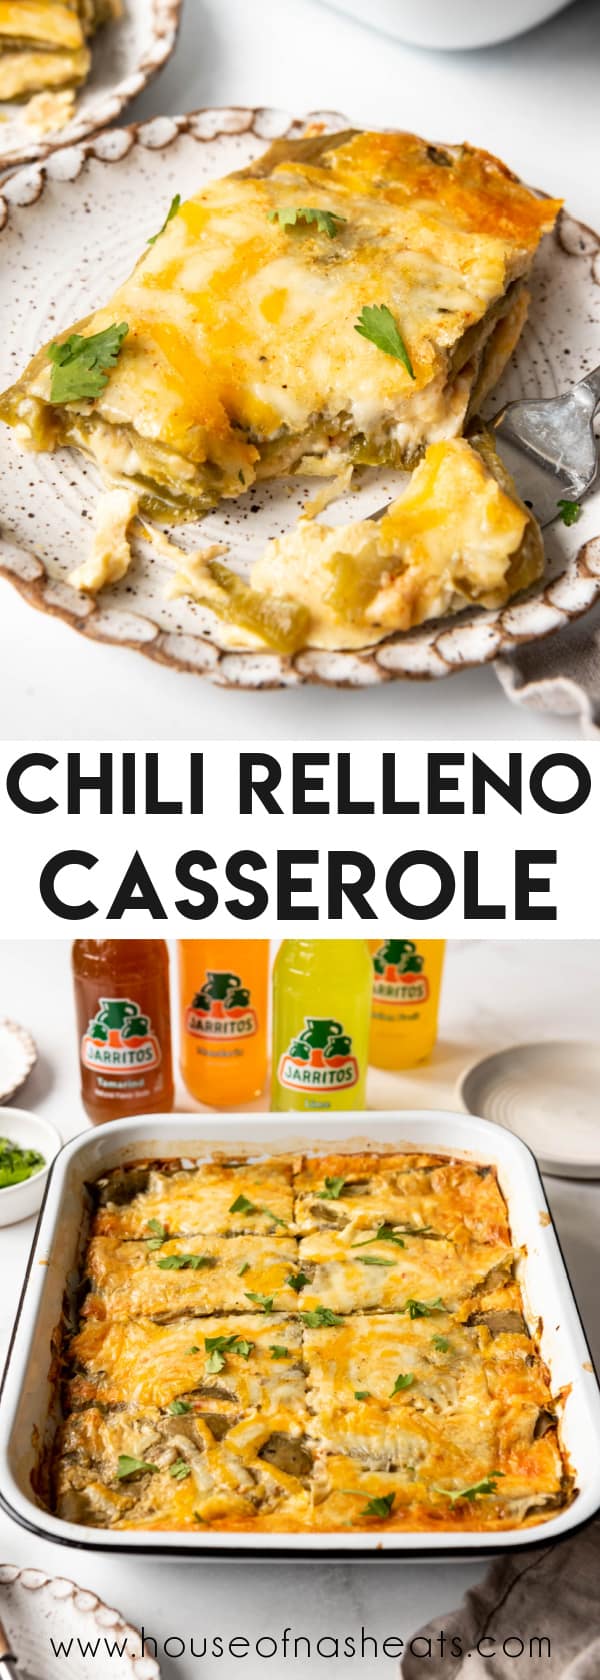 A collage of images of chili relleno casserole with text overlay.